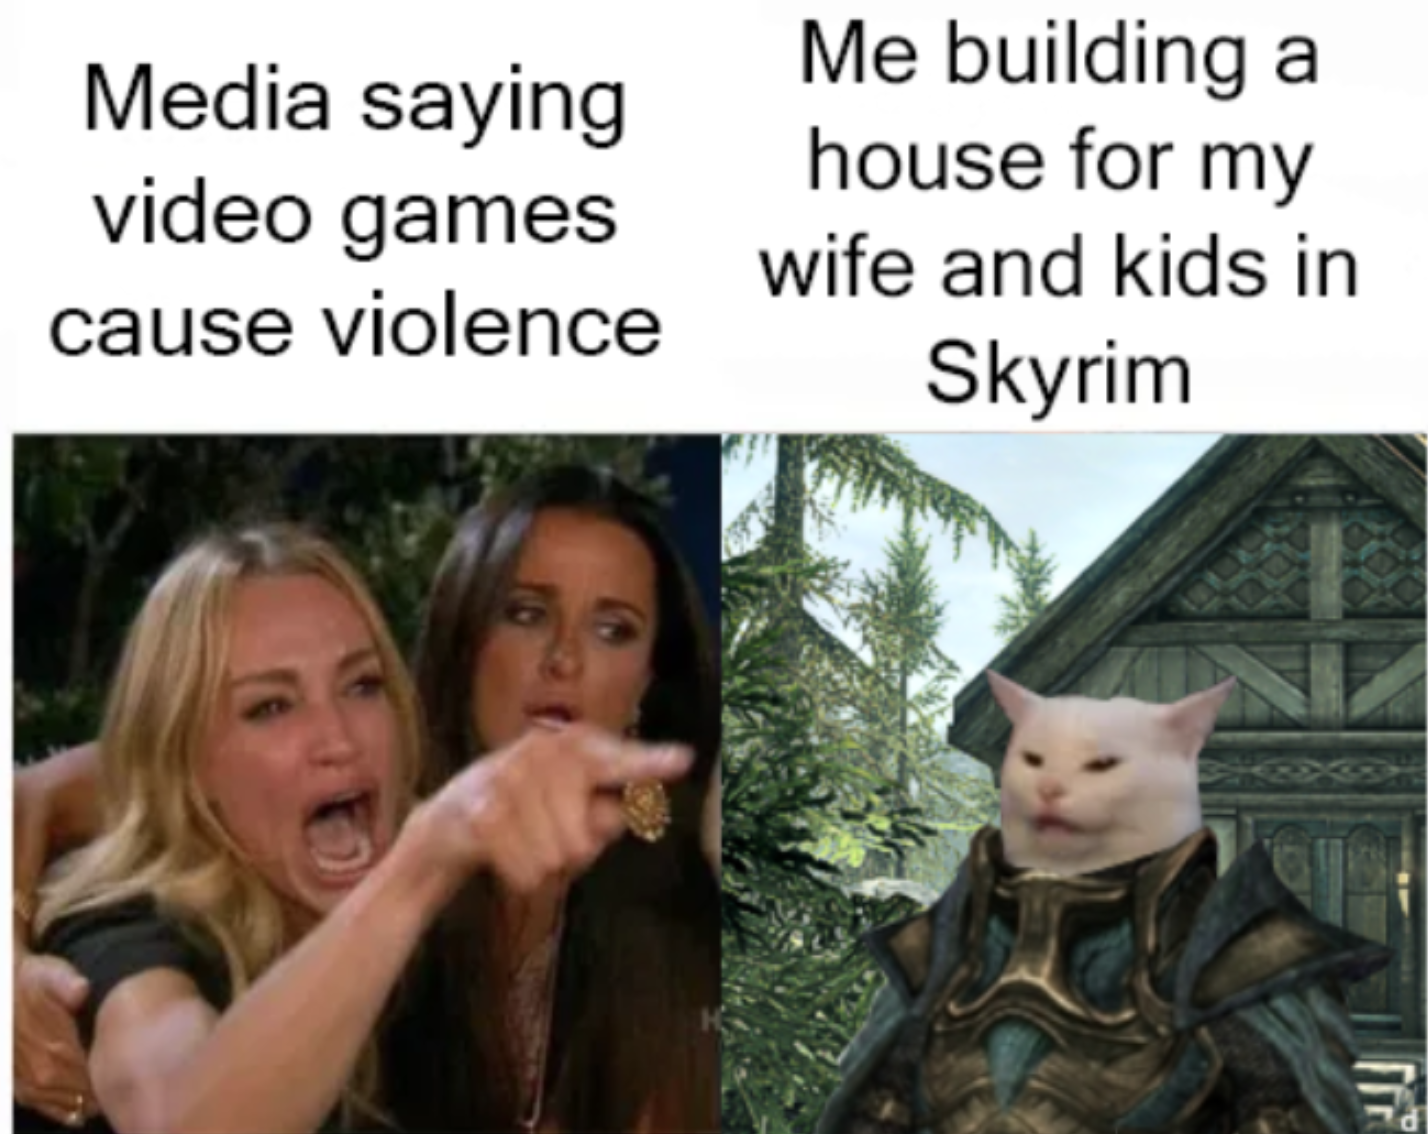 me building a house for my wife - Media saying video games cause violence Me building a house for my wife and kids in Skyrim